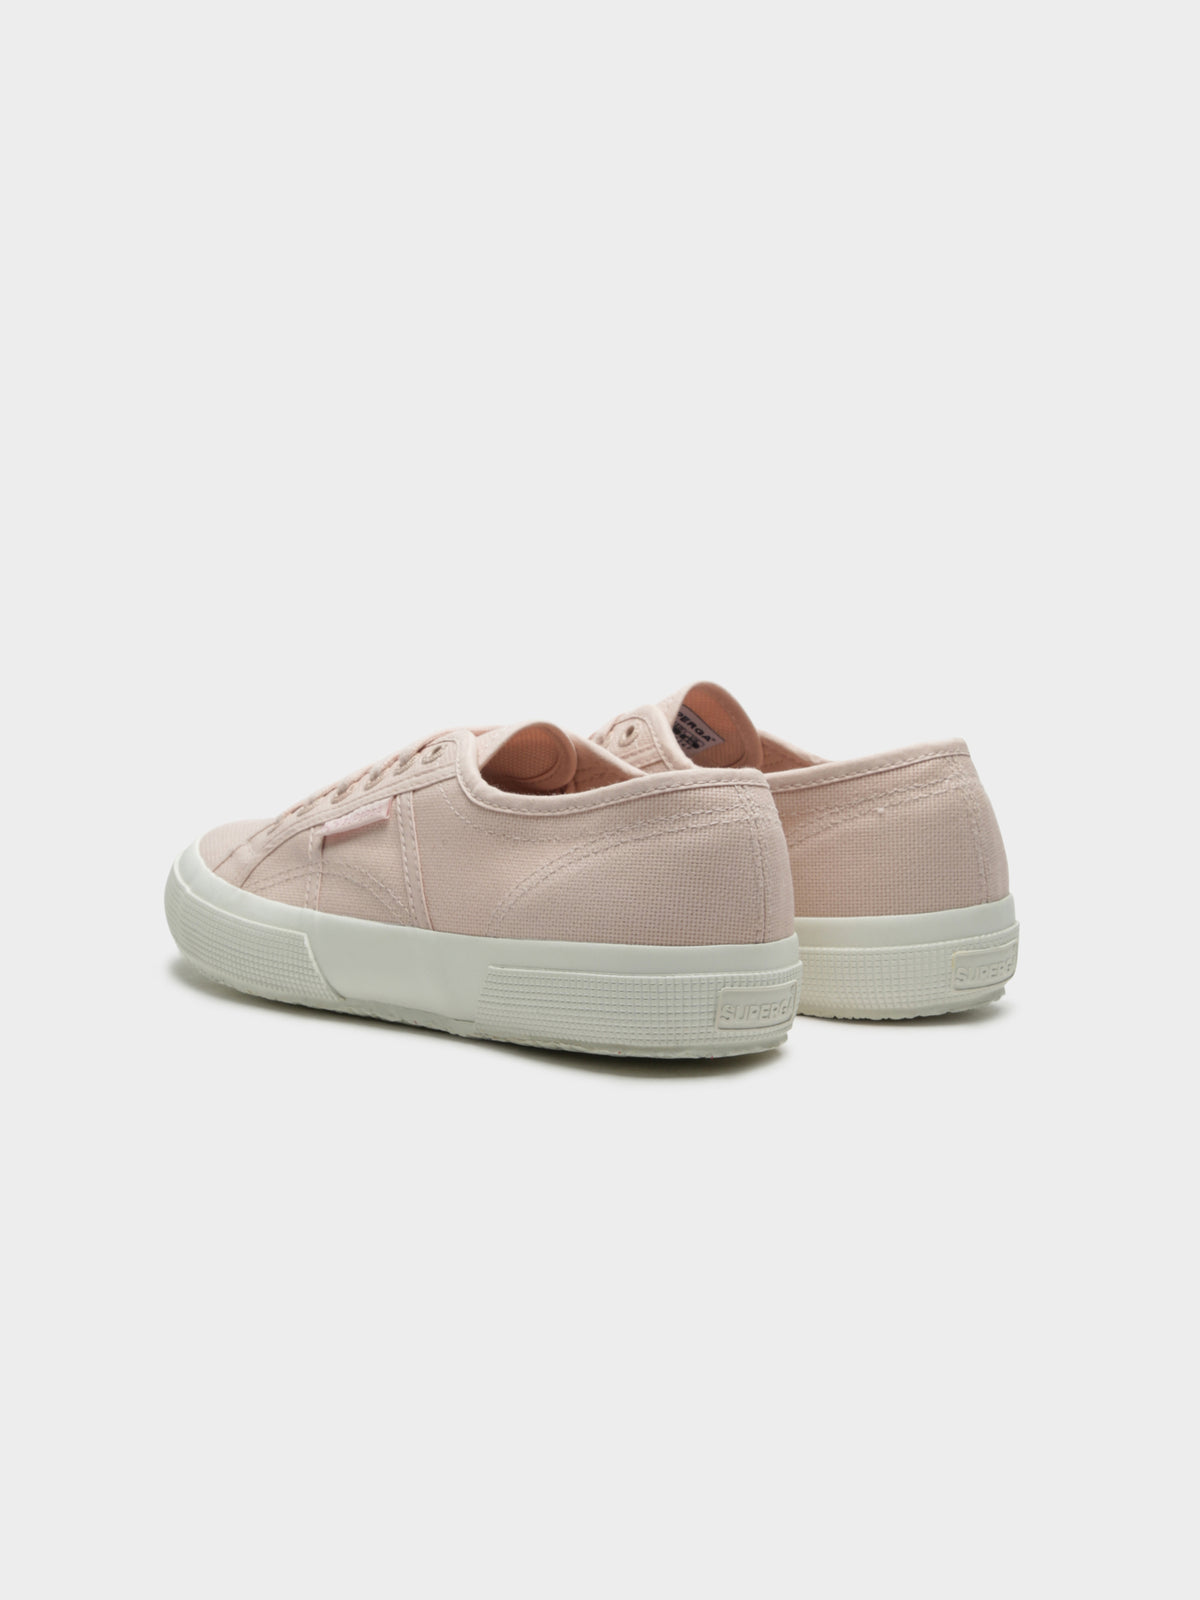 Womens 2750 Cotu Classic Sneakers in Pink Skin and White